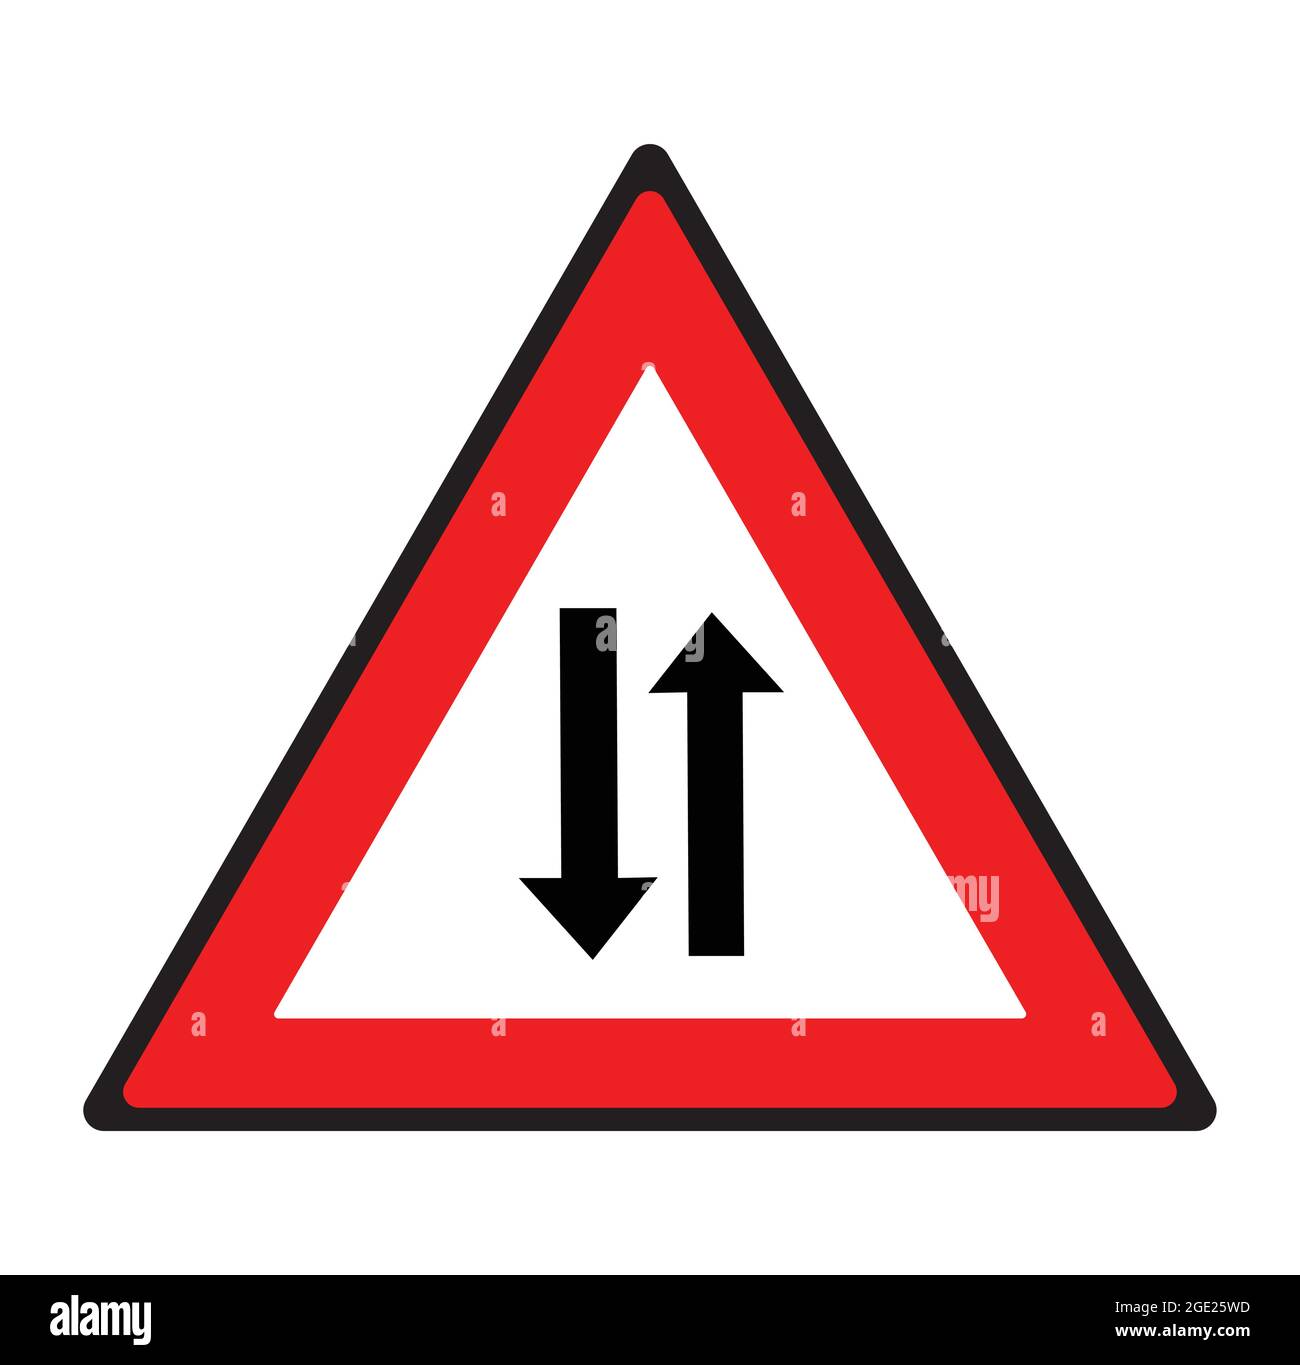 Two way traffic road sign. Safety symbol. Stock Vector